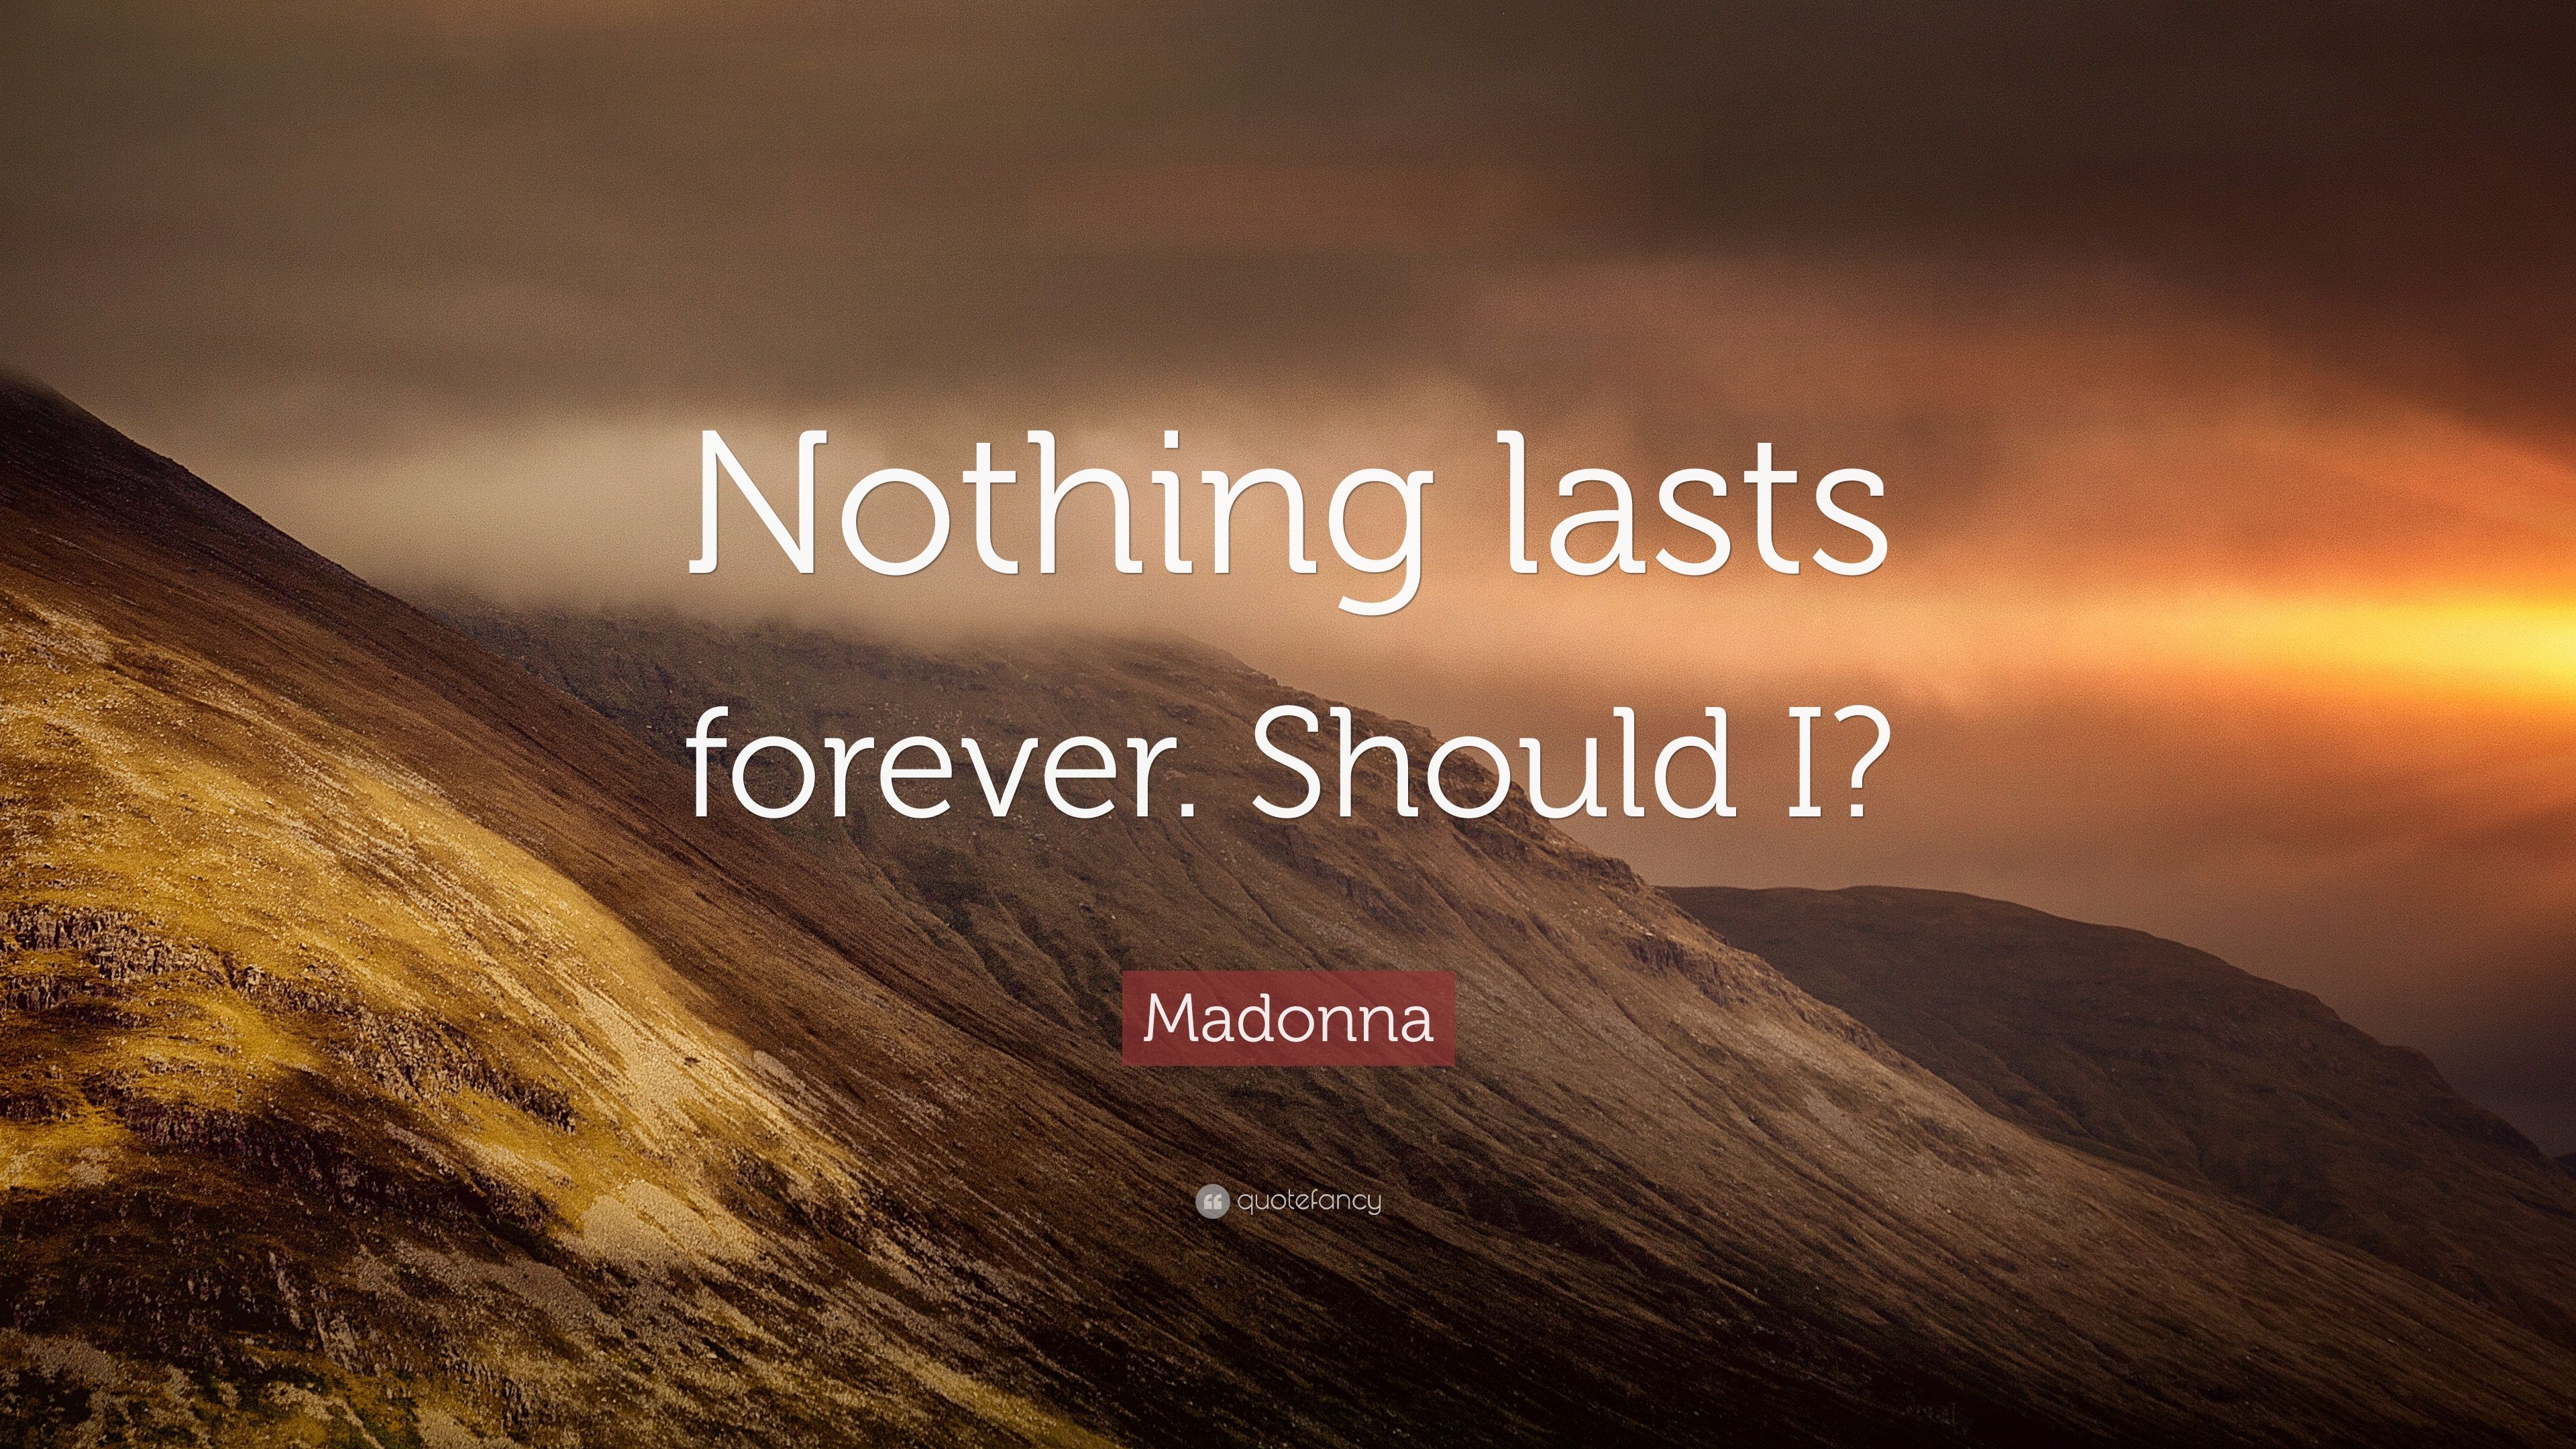 Madonna Quote: “Nothing lasts forever. Should I?” (7 wallpaper)